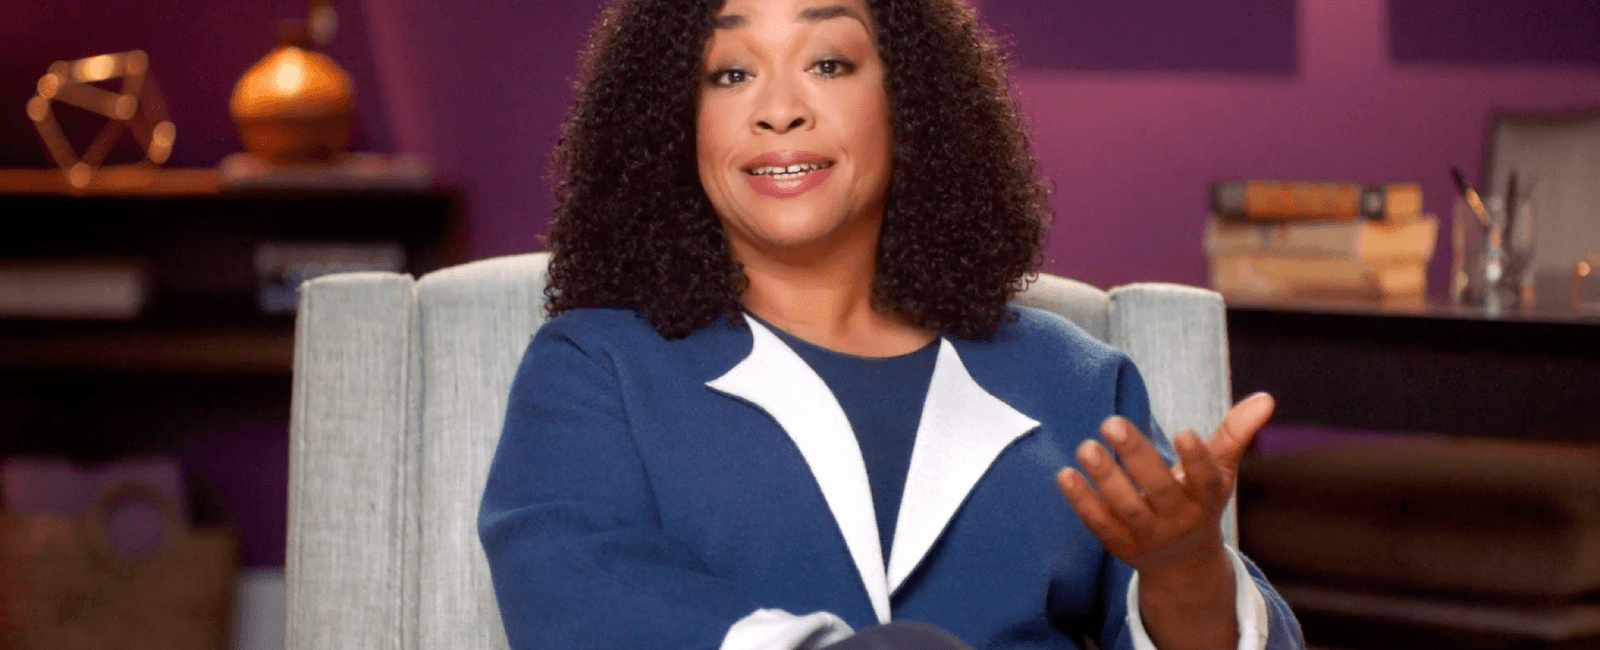 After years of writing teen movies shonda rhimes decided to begin writing for television instead after staying up late every night watching tv with her infant daughter and realizing how good television shows were at the time